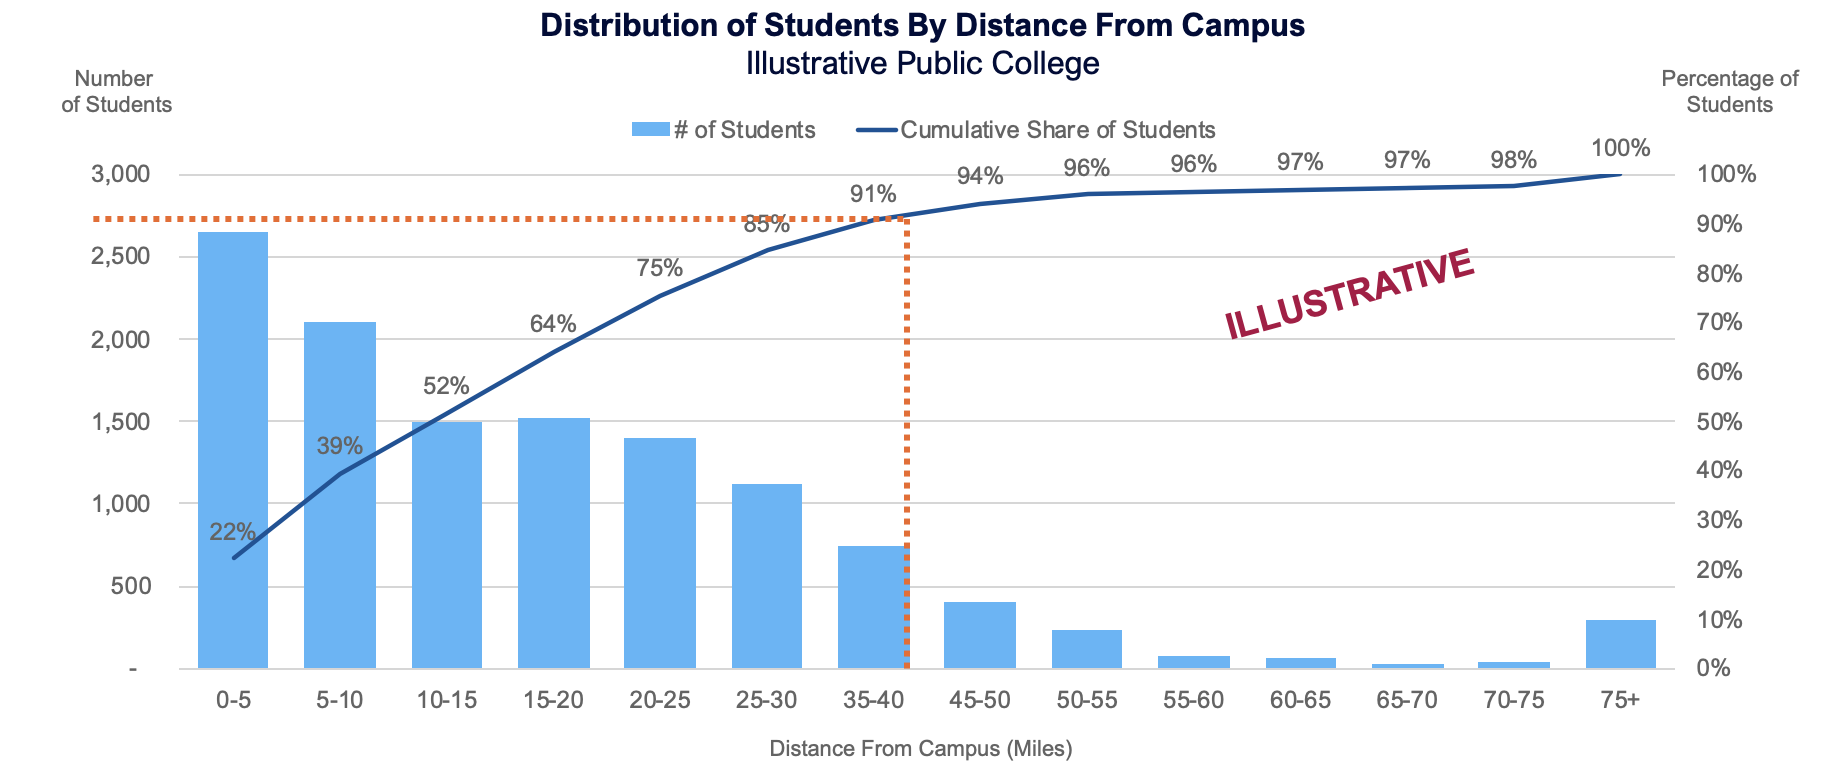 Distribution of Students By Distance From Campus (Illustrative Public College)